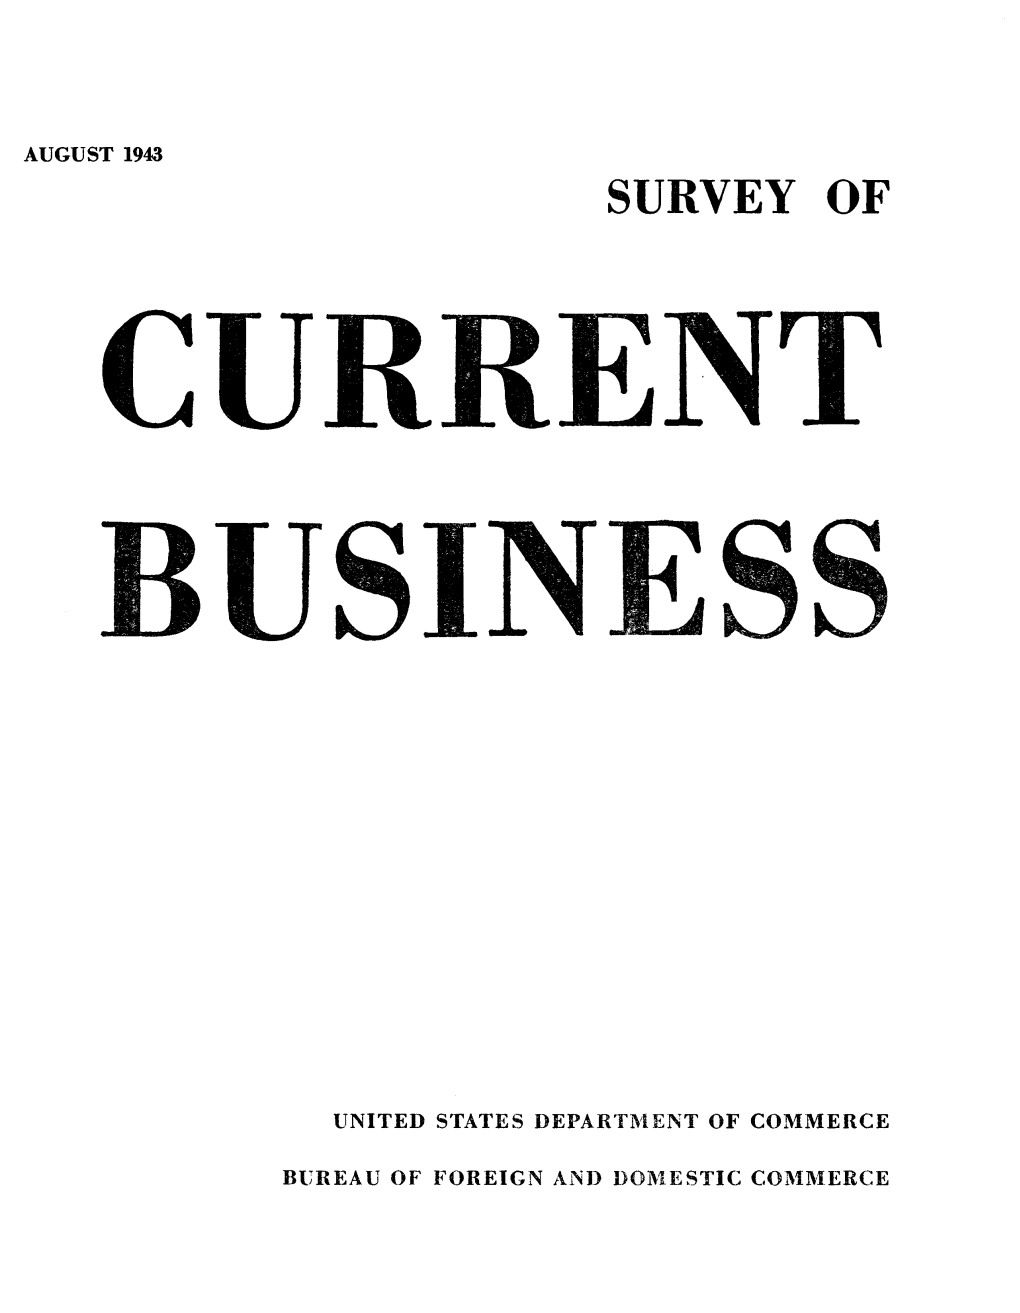 SURVEY of CURRENT BUSINESS August 1943 Spent More for Apparel Than Would Be Expected on the the Trend in Inventories Basis of Their Incomes